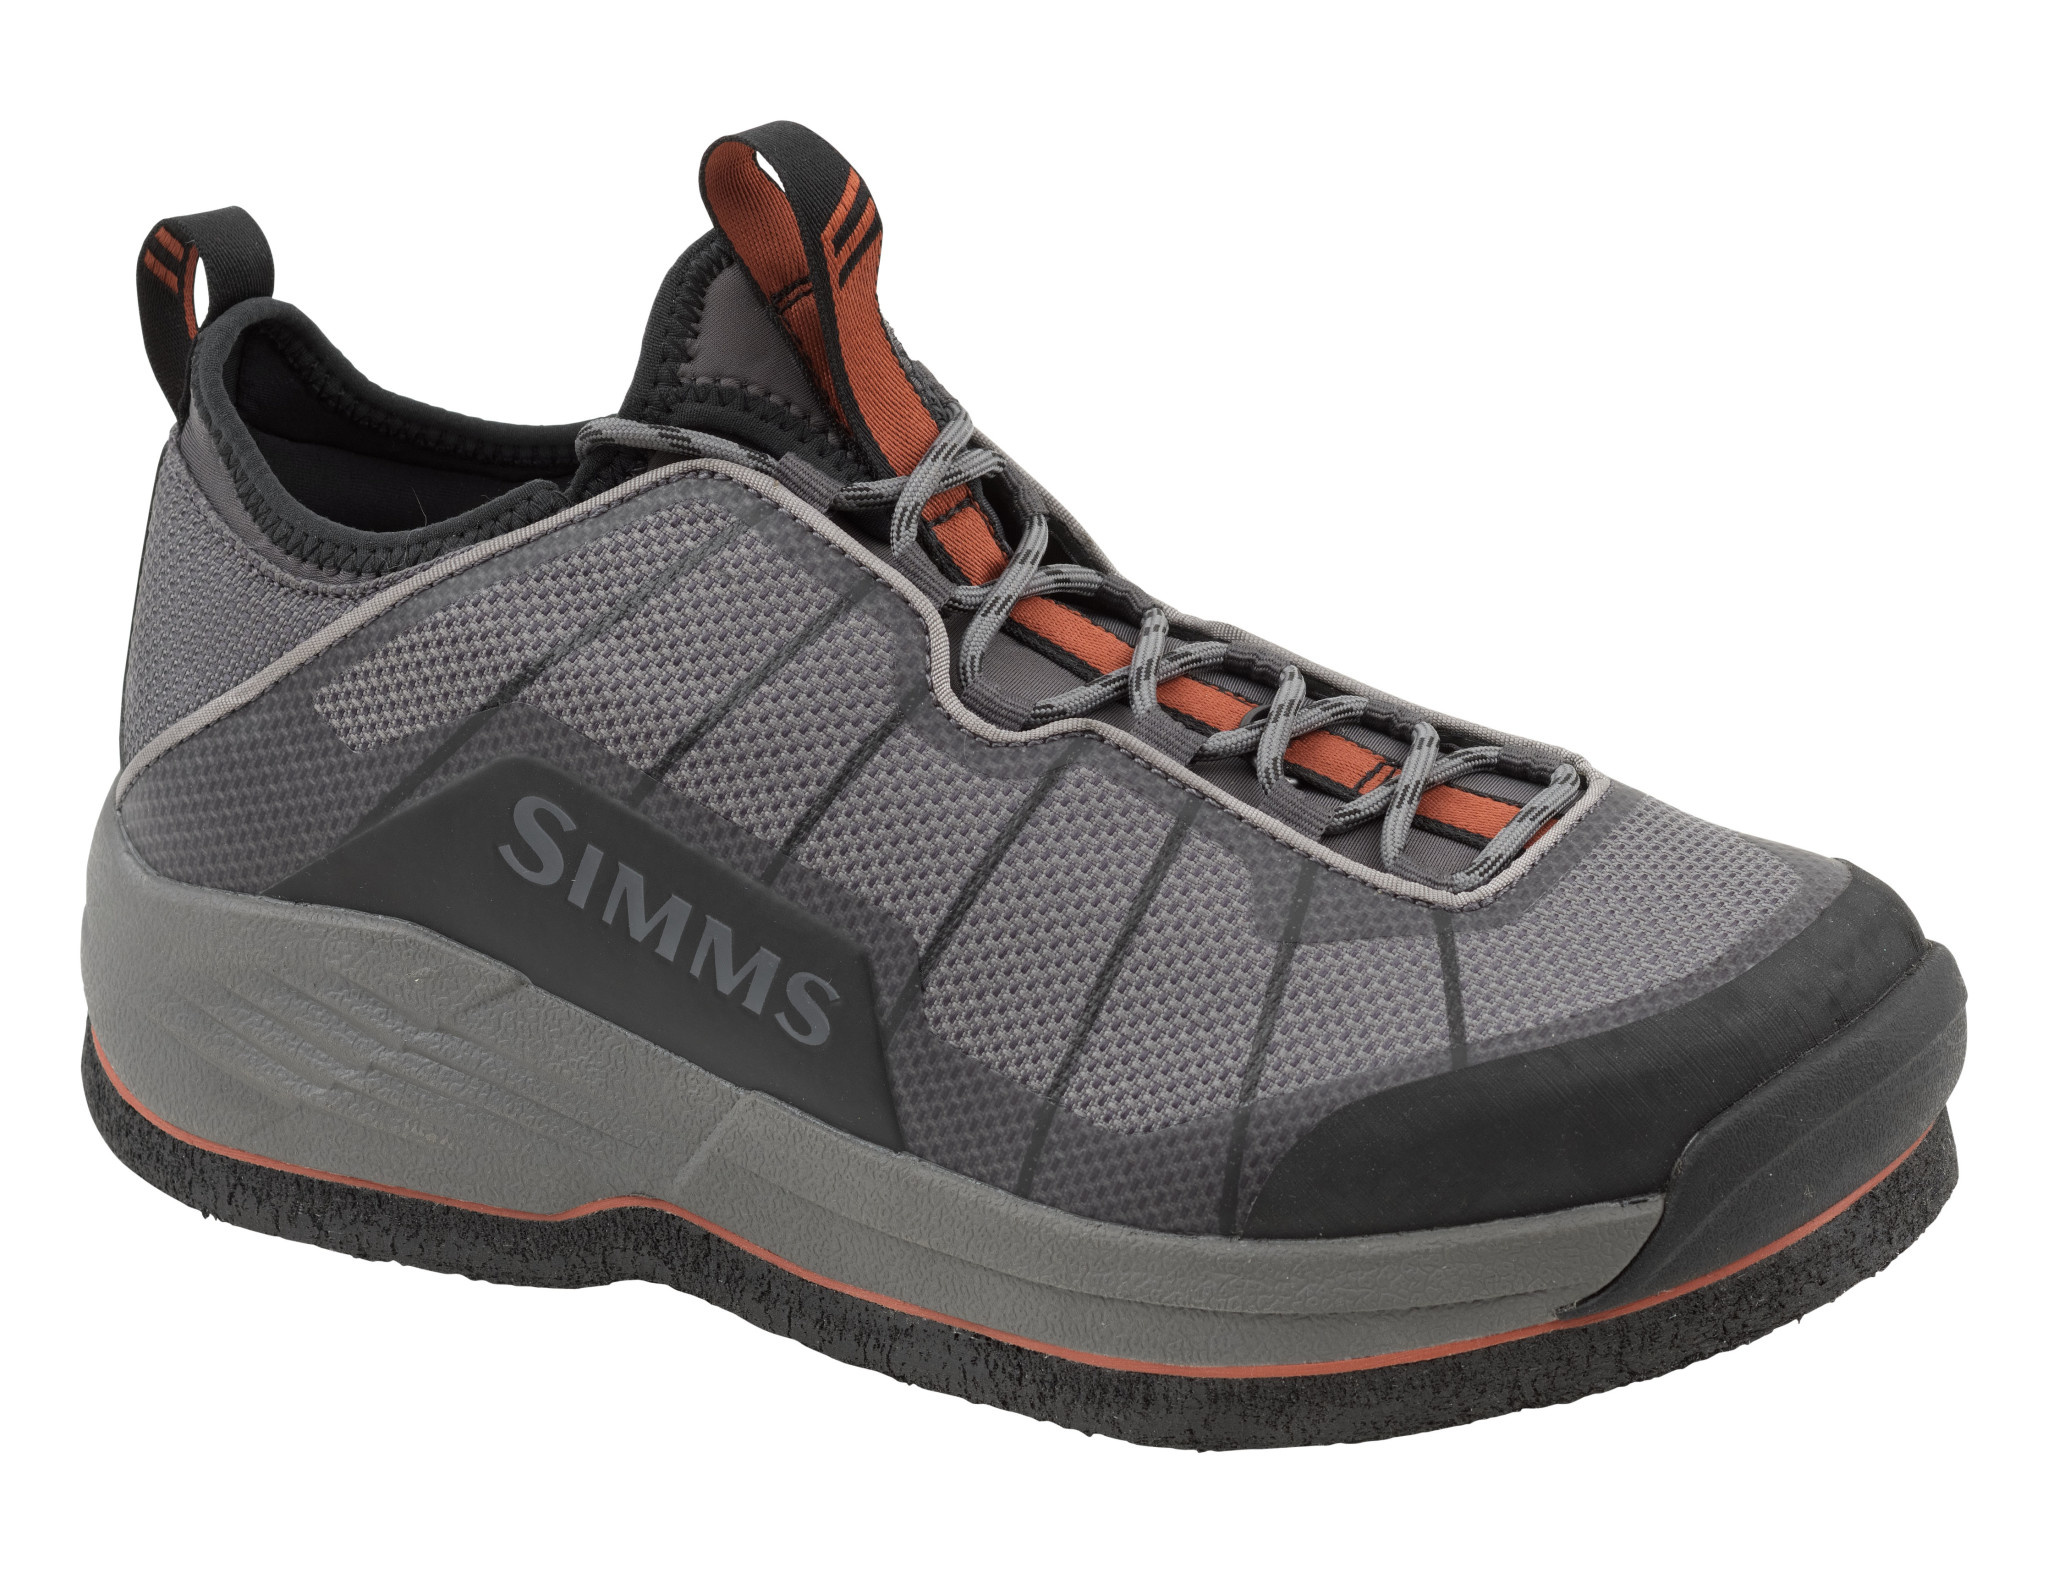 wading shoes for flats fishing